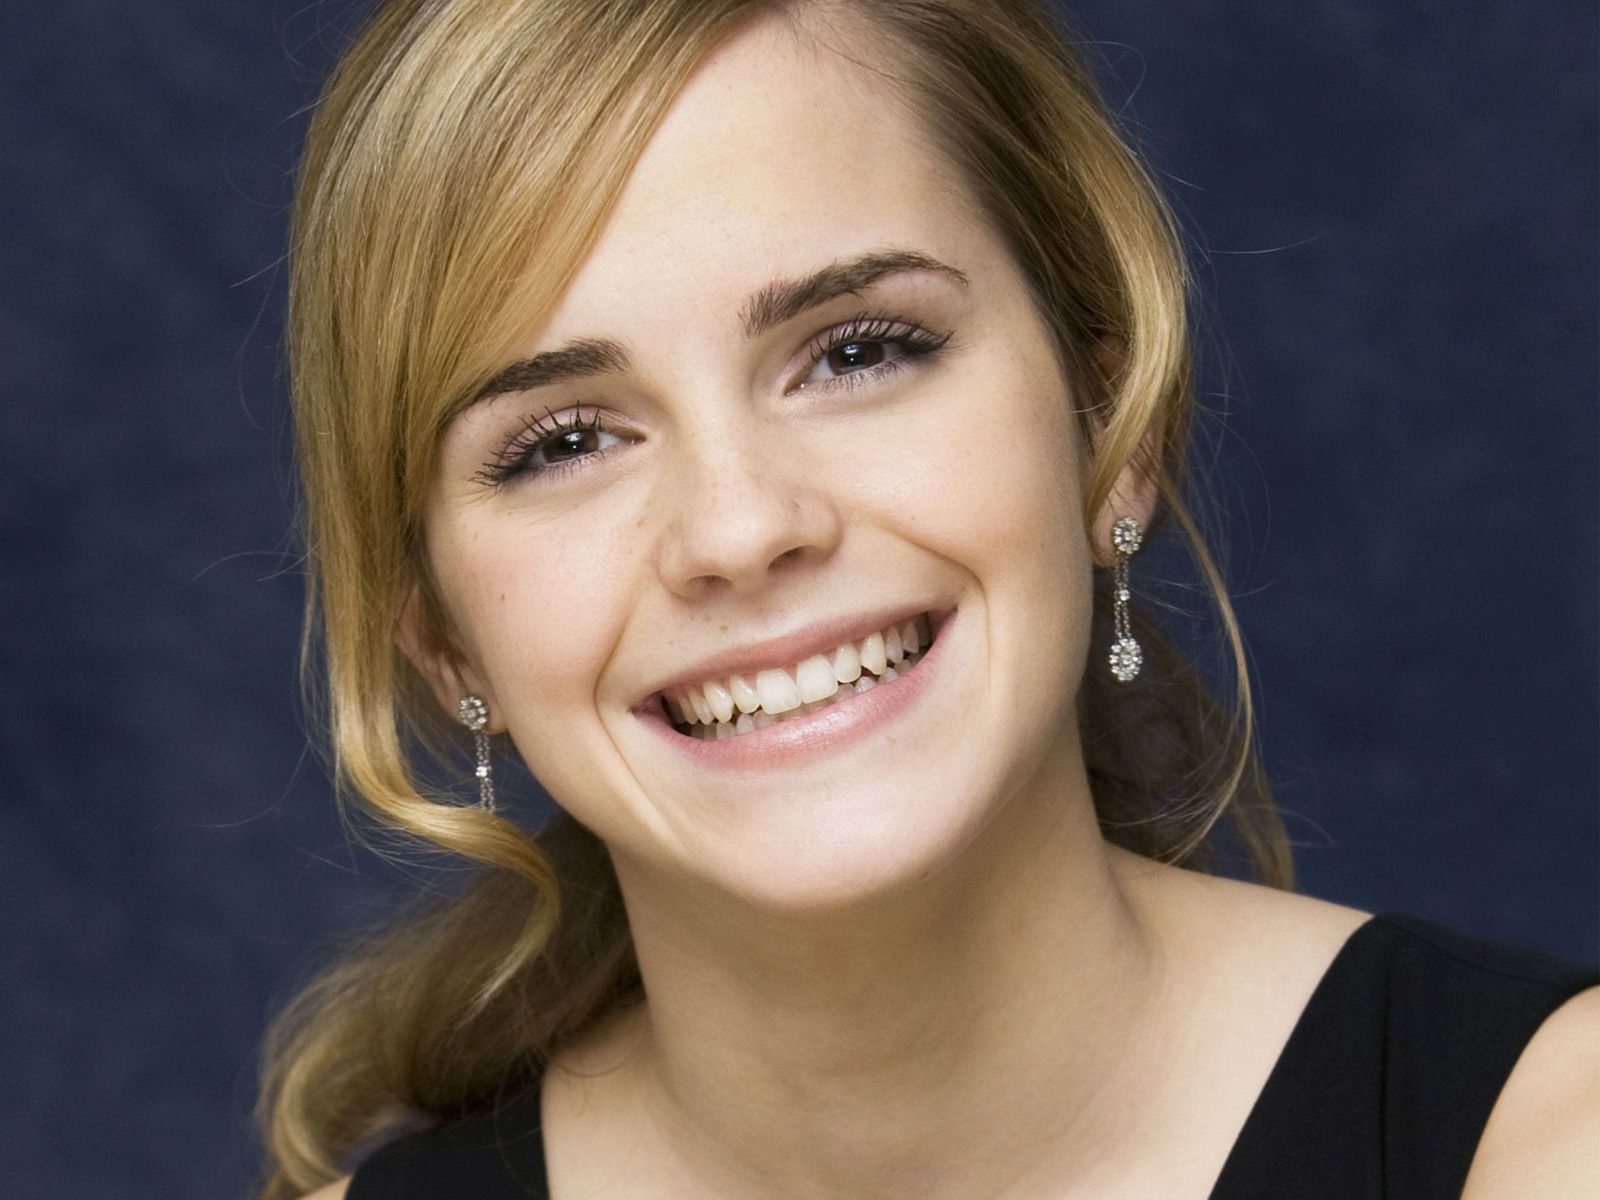 Emma Watson Beautiful Smile High Quality Wallpaper in jpg format for free download